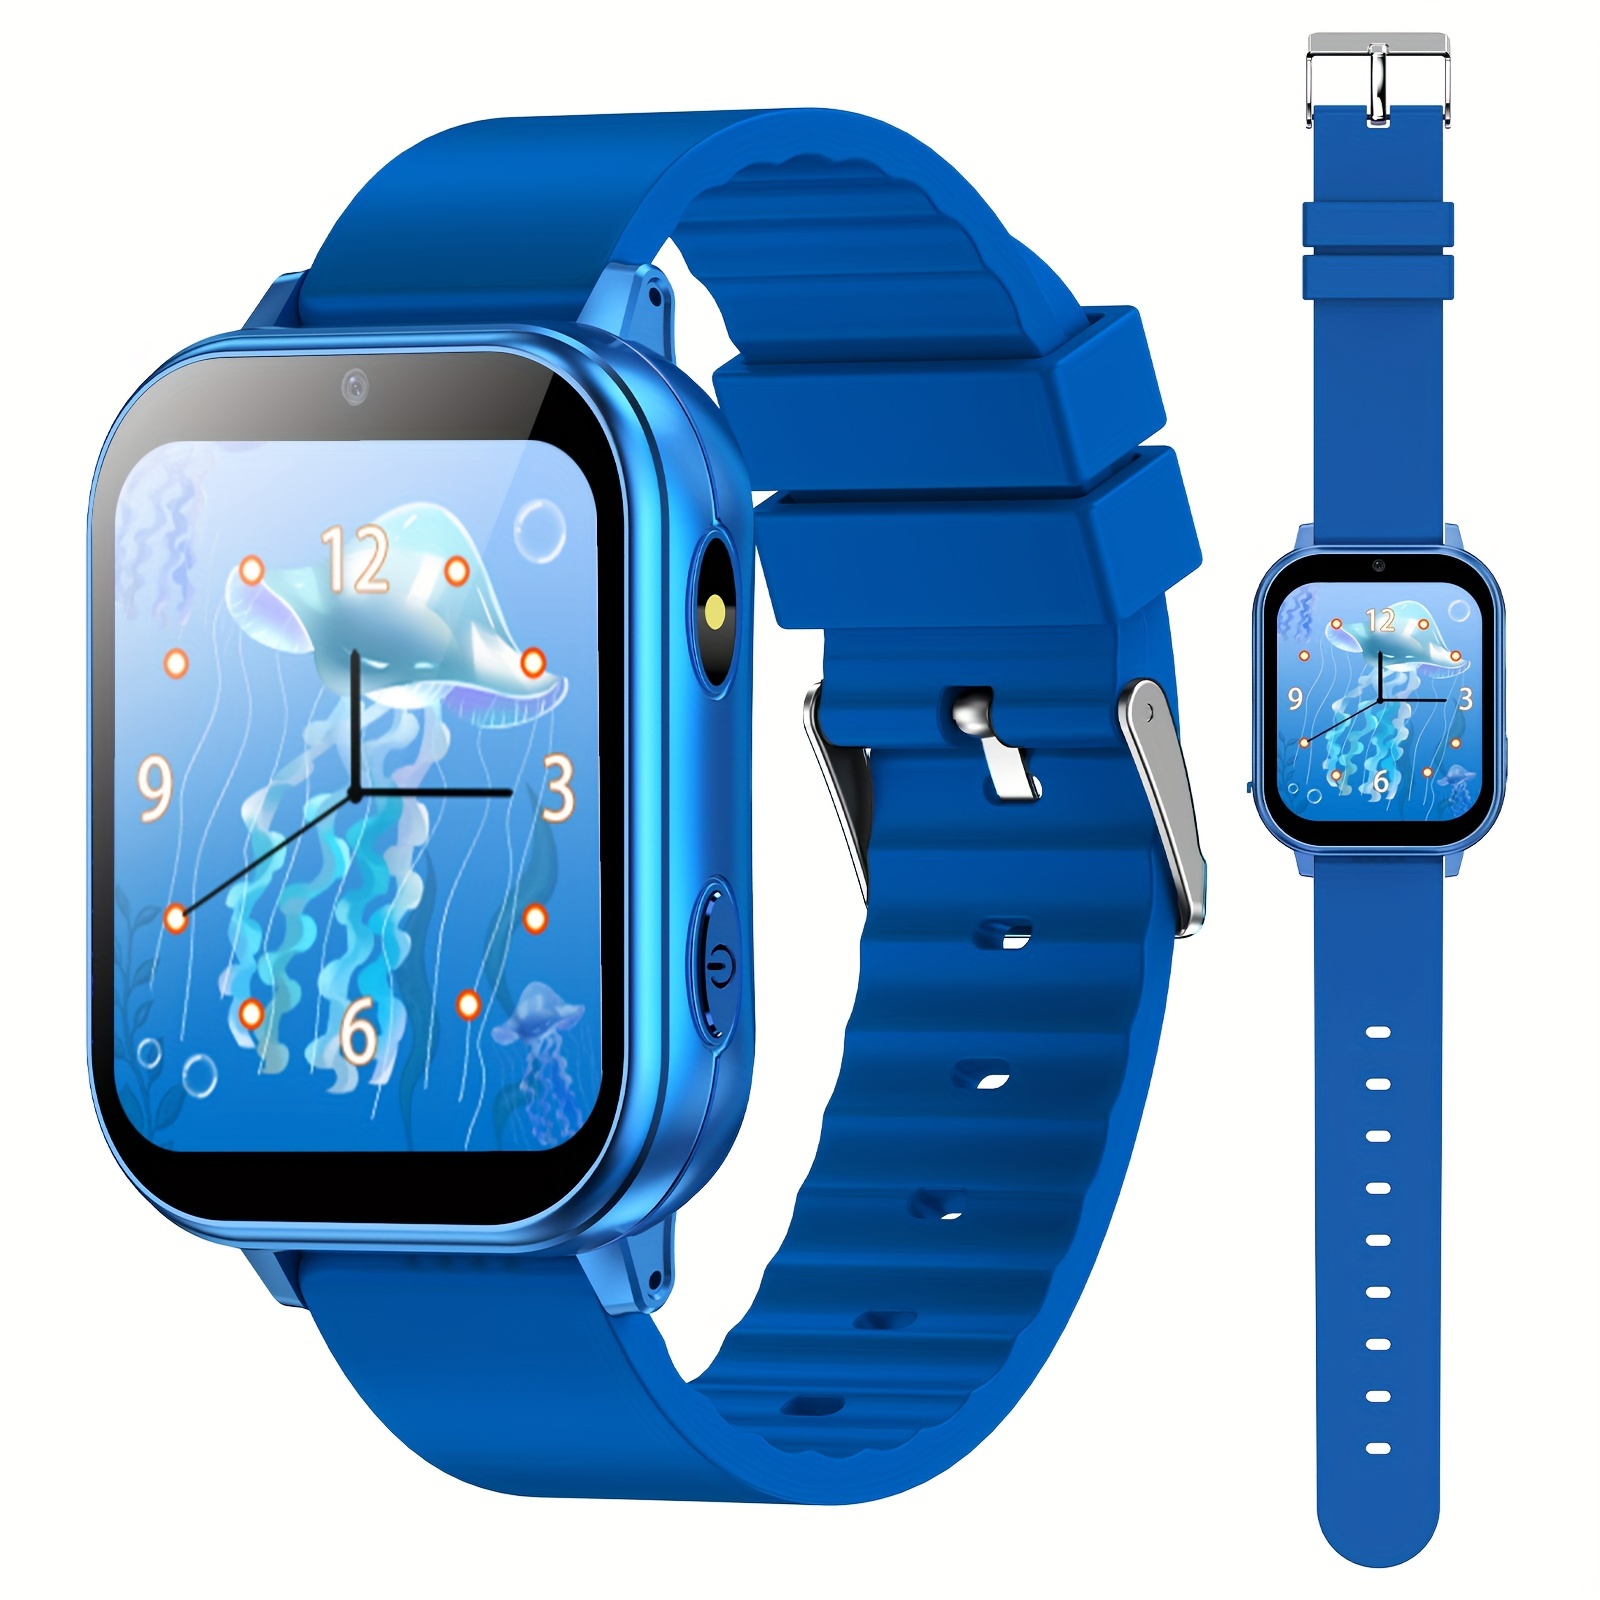 

Smart Watch For Kids Toys, Gift For 4-14 Ys Boys And Girls With 22 Games Hd Camera Video Music Player Pedometer Alarm Clock Smartwatches For Children Blue